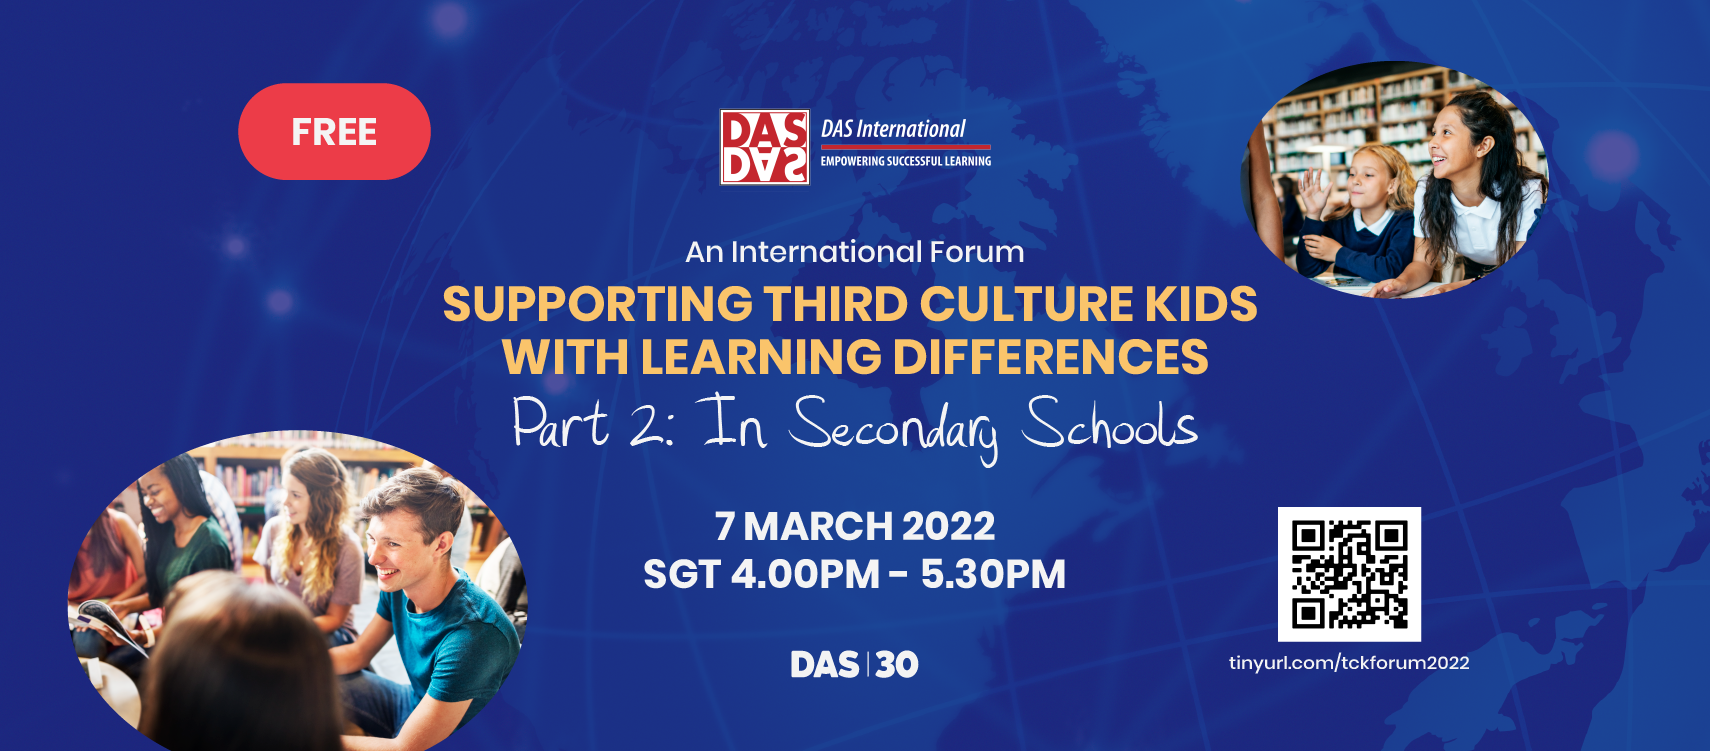 DAS International: Supporting Third Culture Kids with Learning Differences (Part 2), Online Event